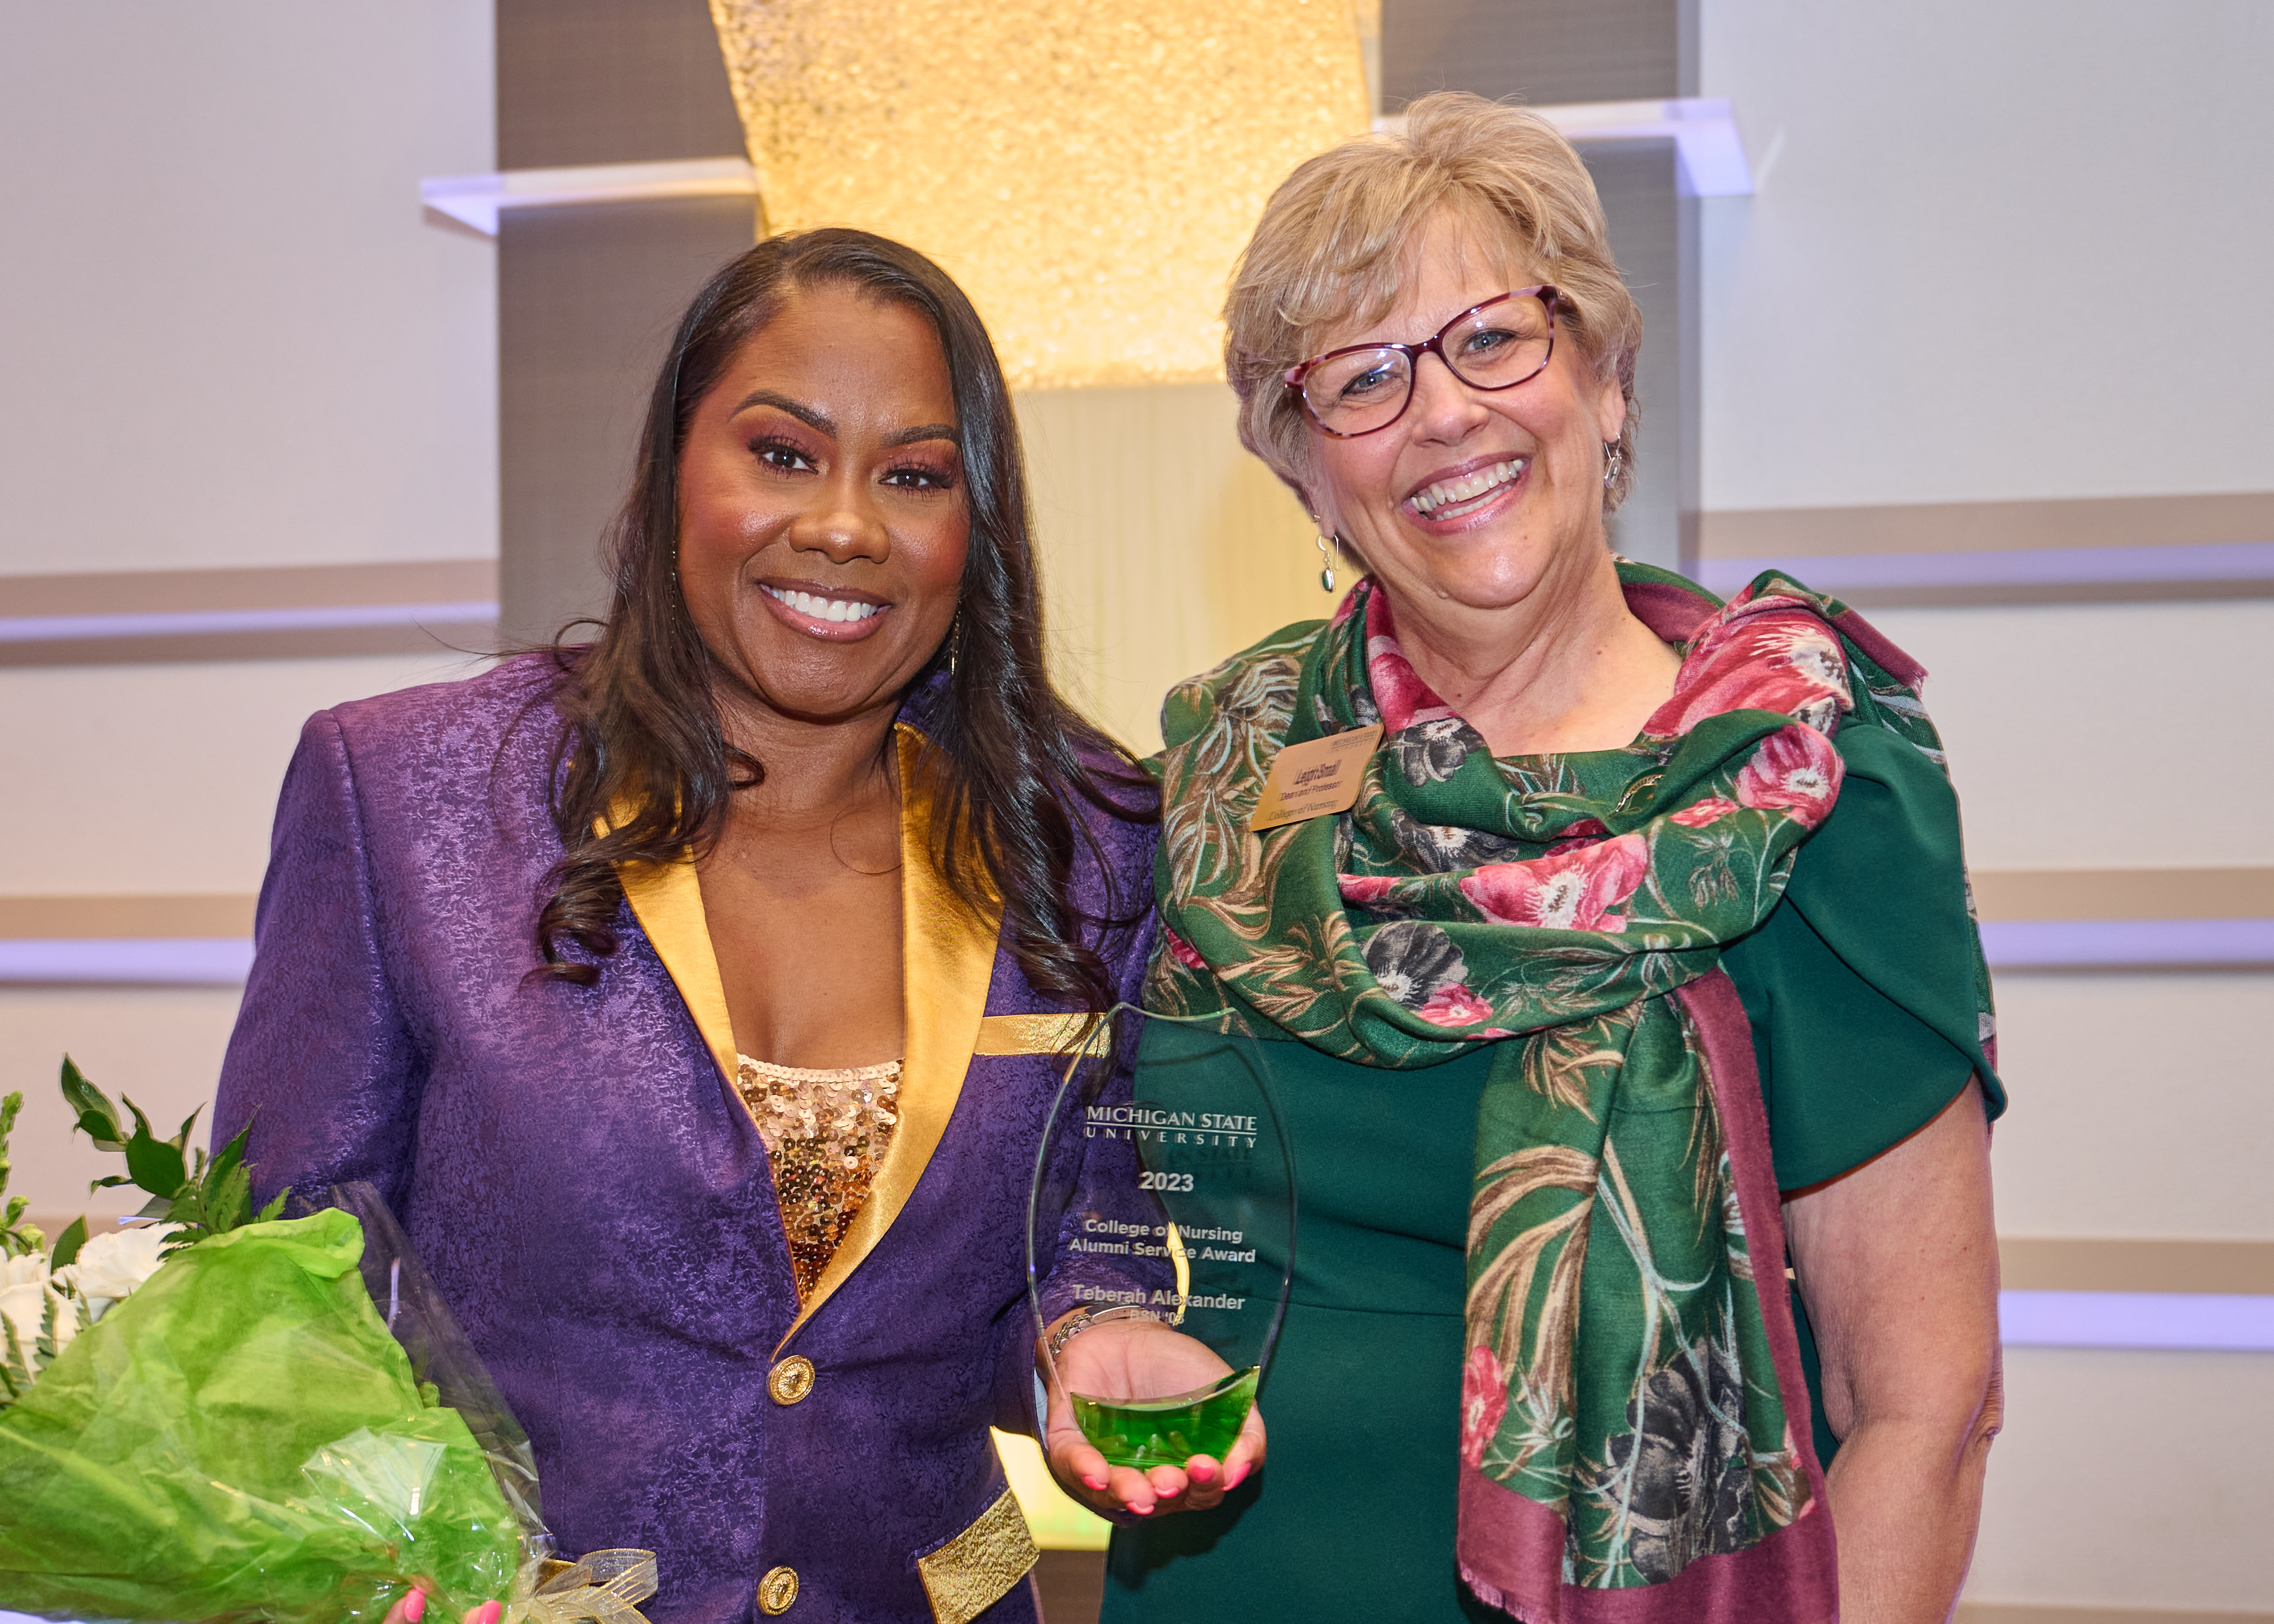 Teberah Alexander holds a flower bouquet and a crystal trophy for winning the Alumni Service Award. She smiles for a photo along with Dean Leigh Small.